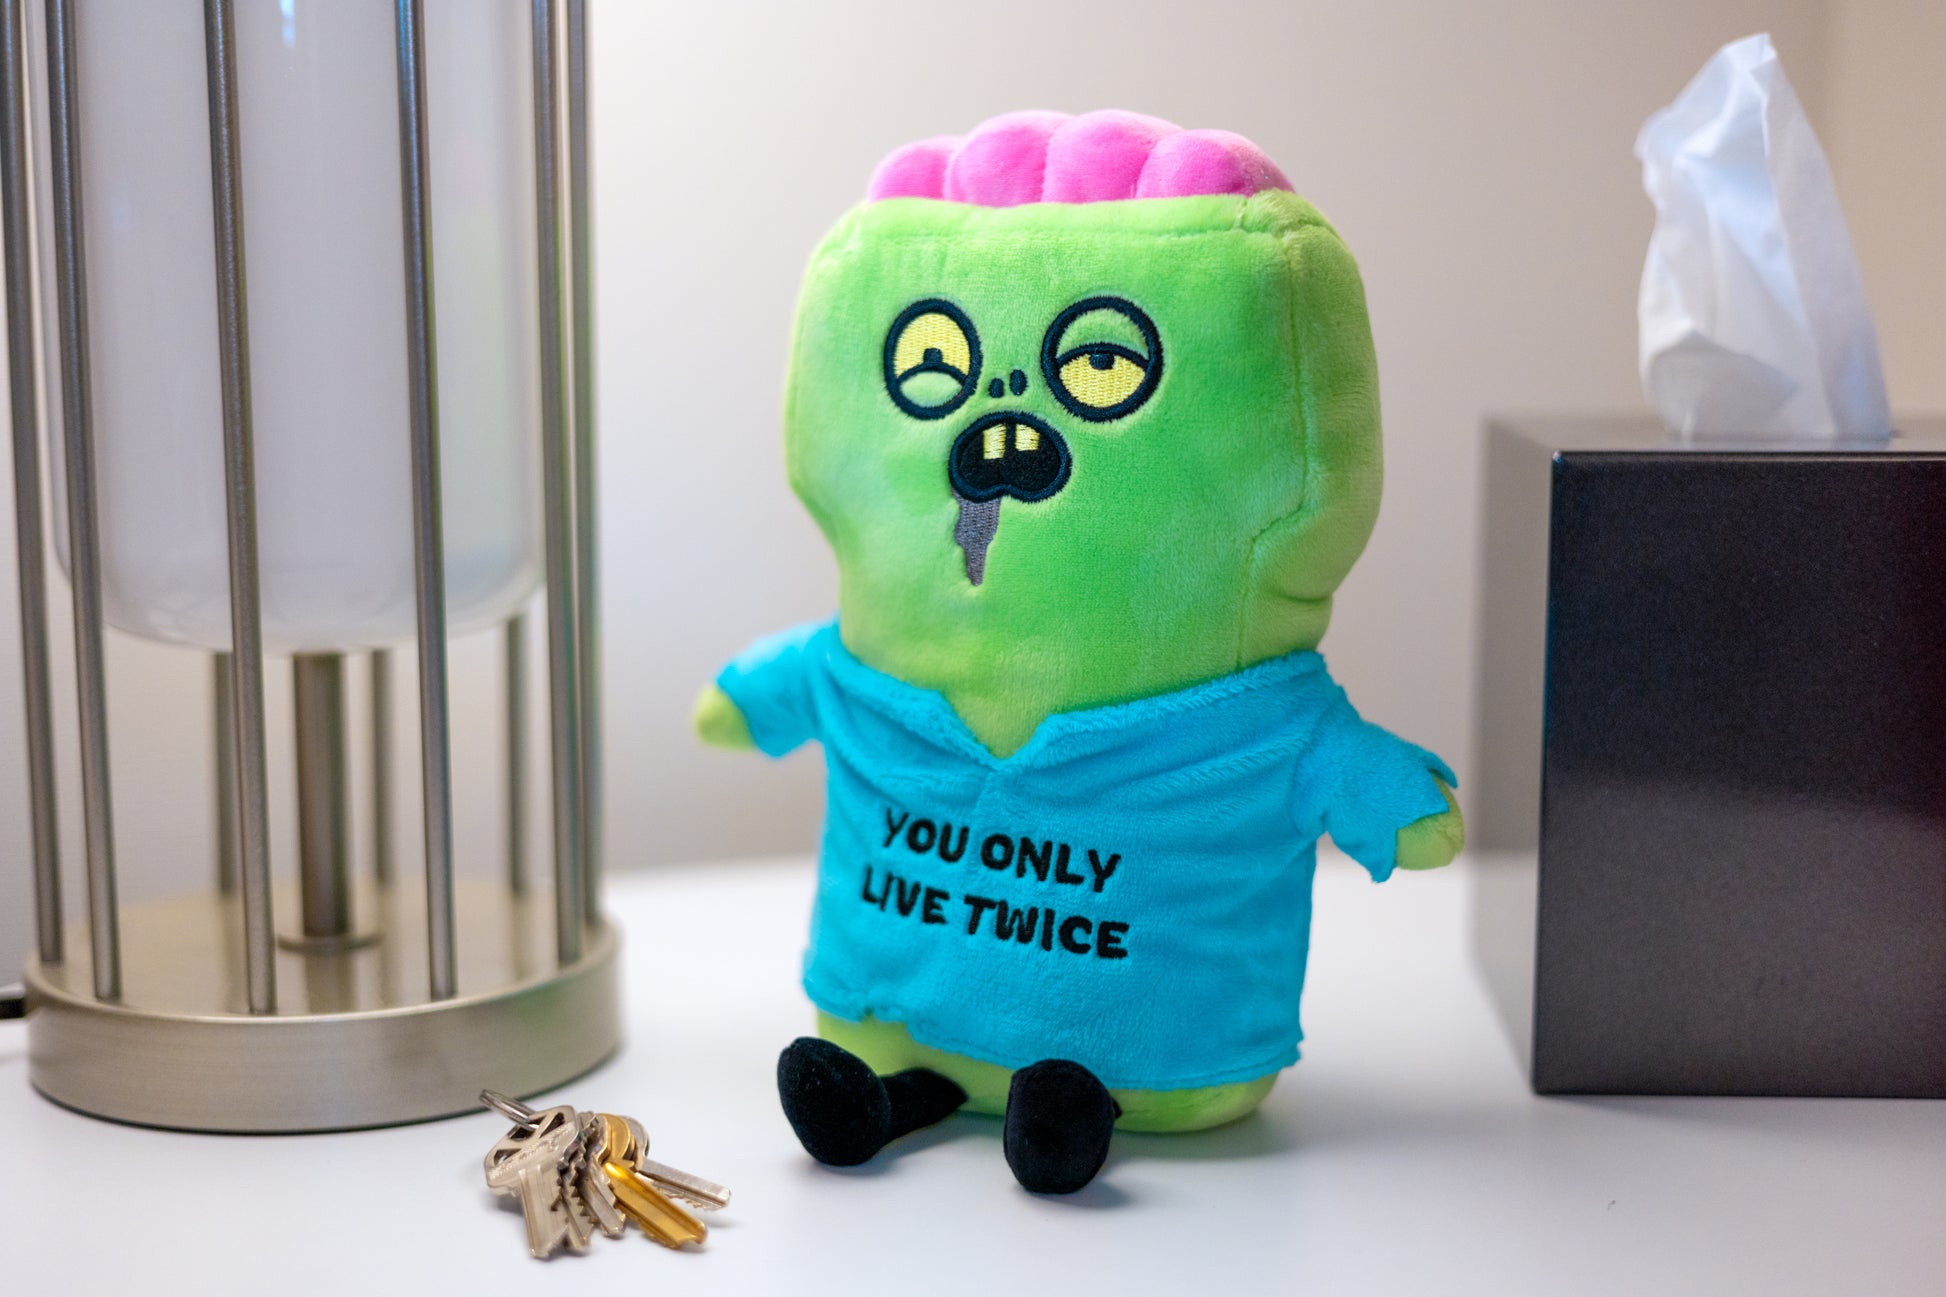 "You Only Live Twice" Zombie Plush